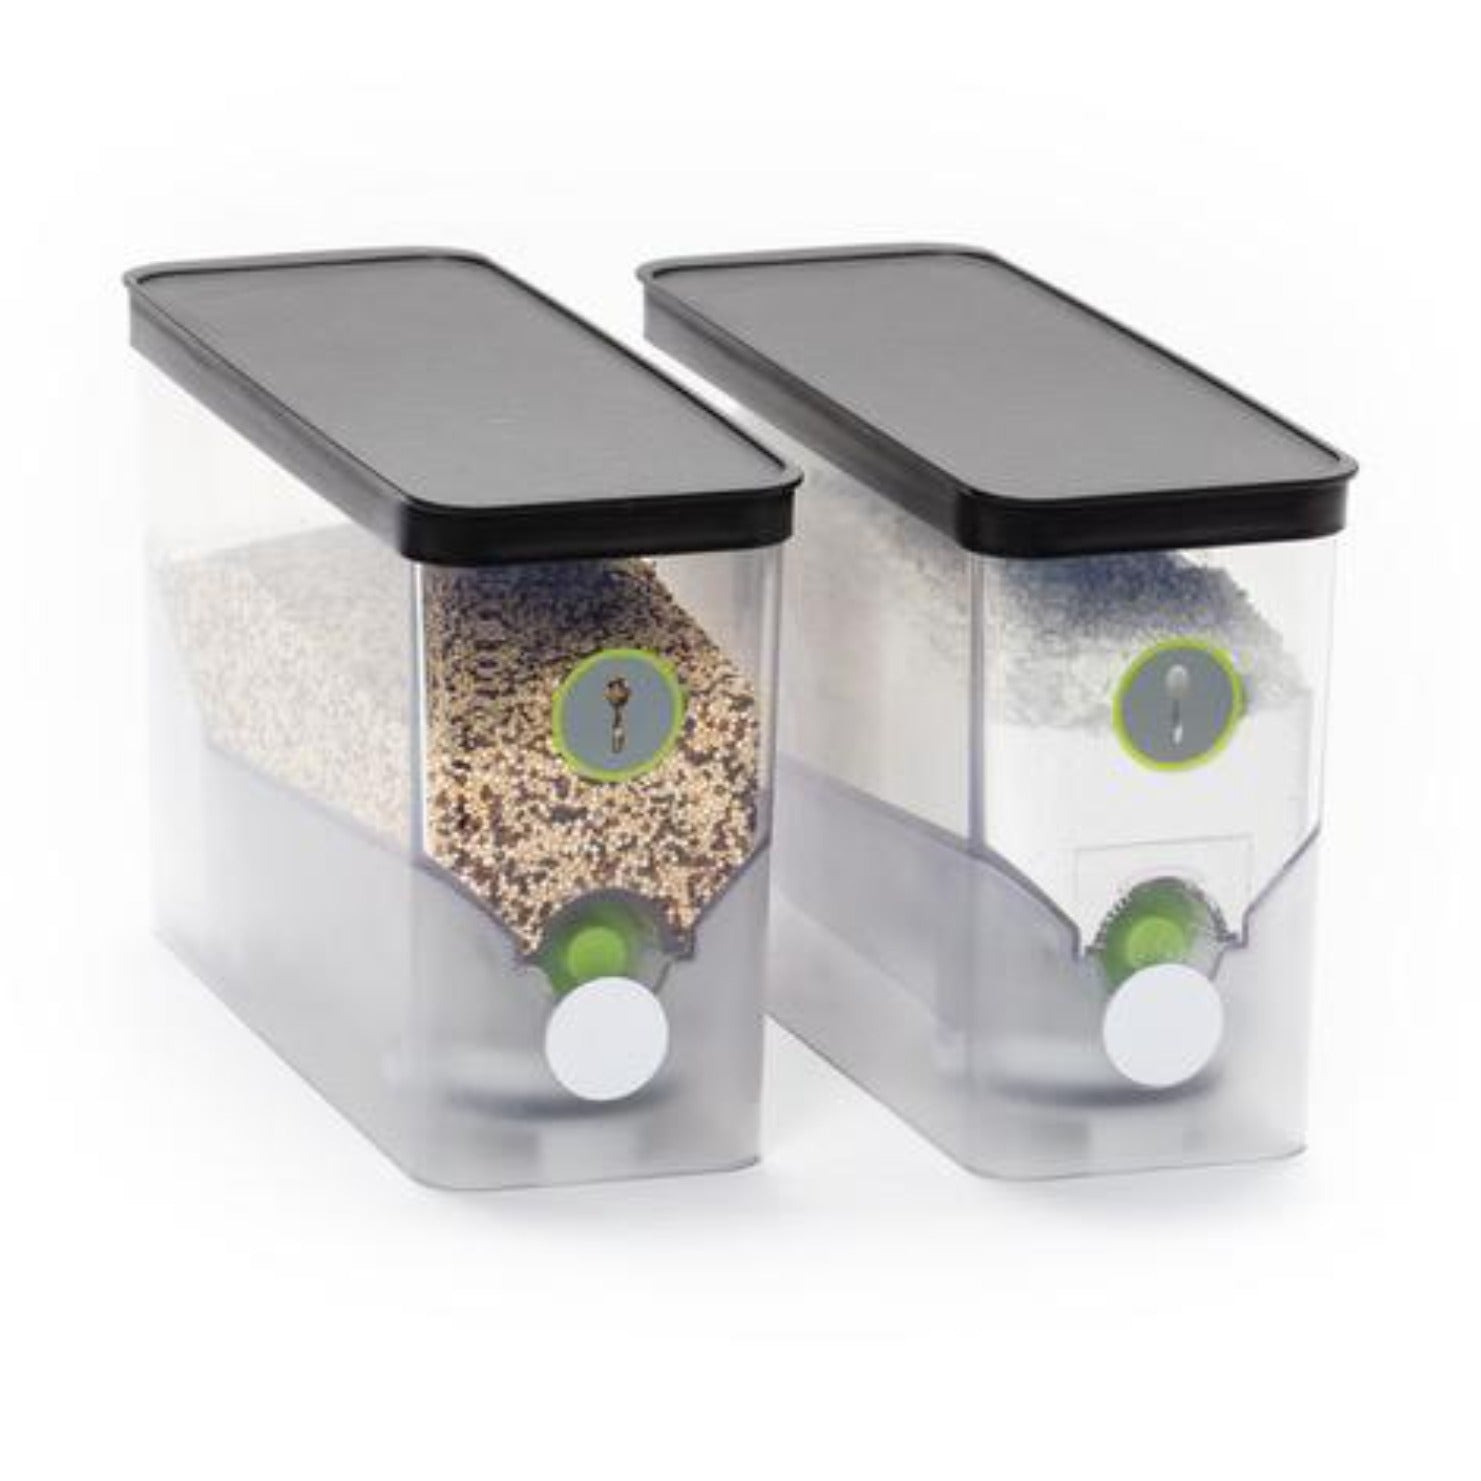 PantryChic SmartCanister, LARGE, Stores, Measures & Dispenses Dry  Ingredients - PantryChic Smart Storage System SOLD SEPARATELY - BPA-Free  Airtight